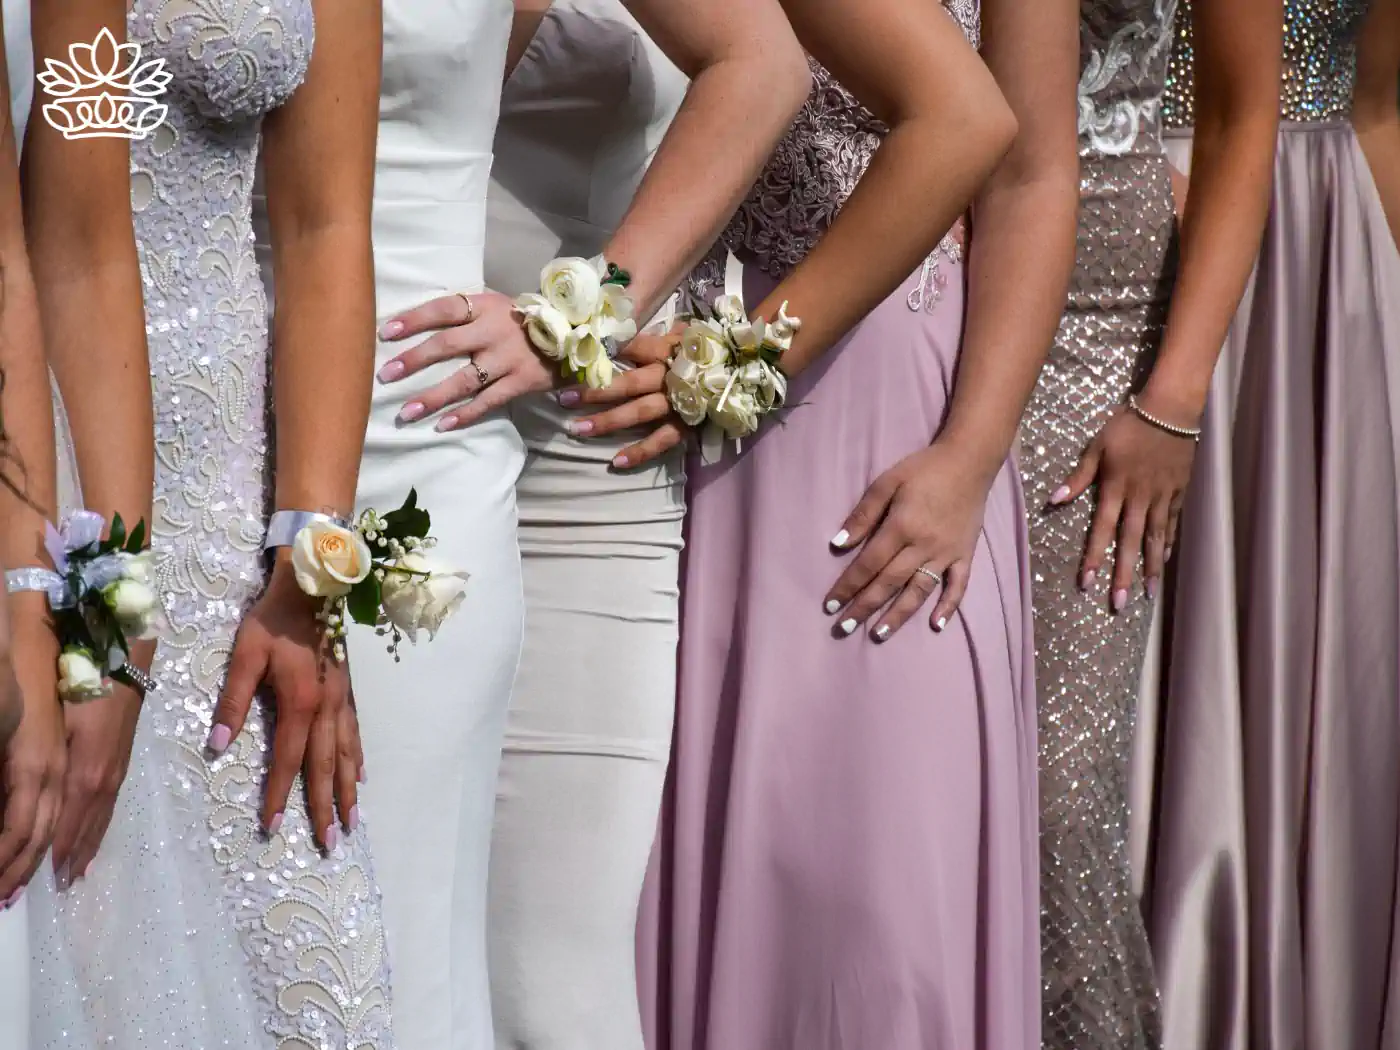 Close-up view of young women at a matric dance, each wearing elegant formal dresses and showcasing delicate wrist corsages with white roses and greenery, symbolizing sophistication and celebration. Fabulous Flowers and Gifts - Matric Dance. Delivered with Heart.